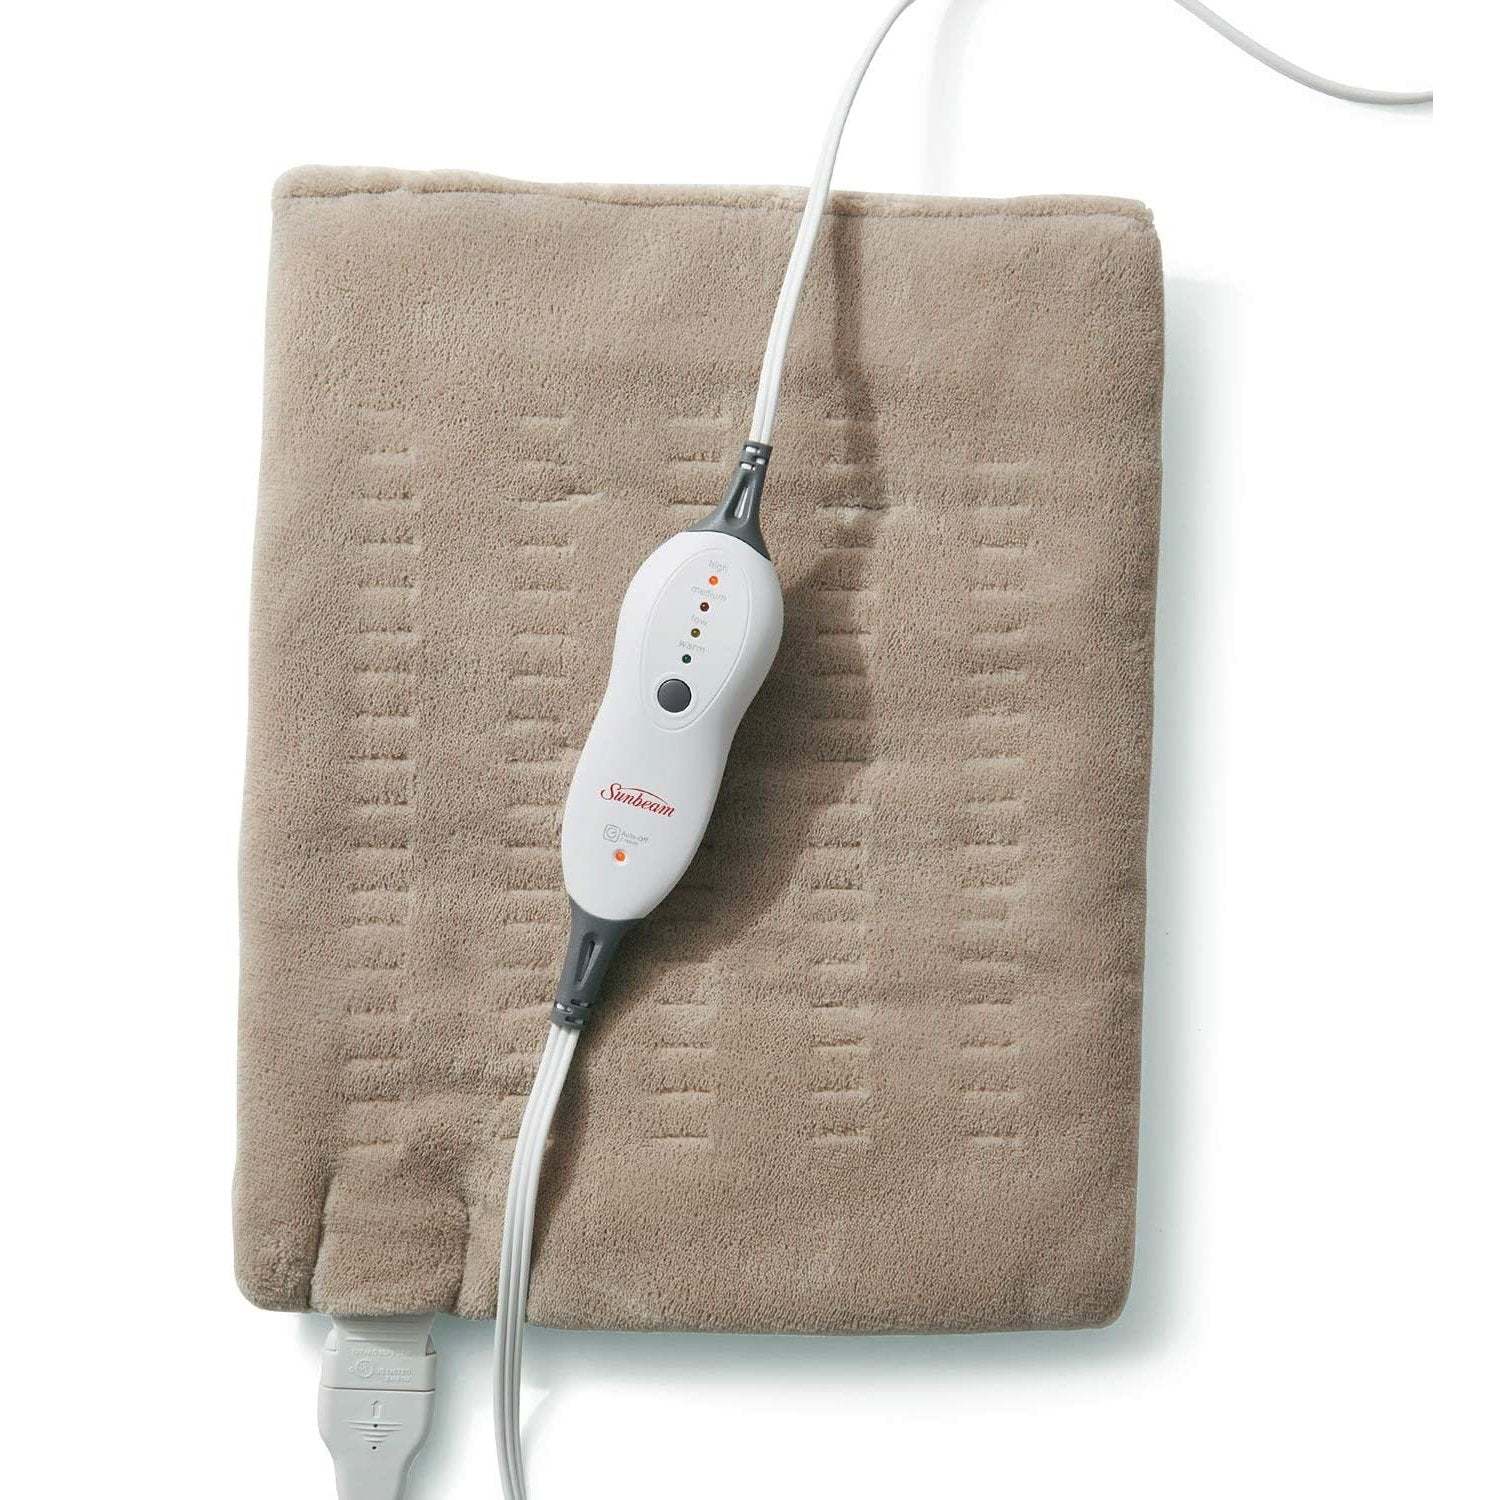 Primary image for Sunbeam - Heating Pad 12 '' x 15 '' With Auto Shut Off, Beige